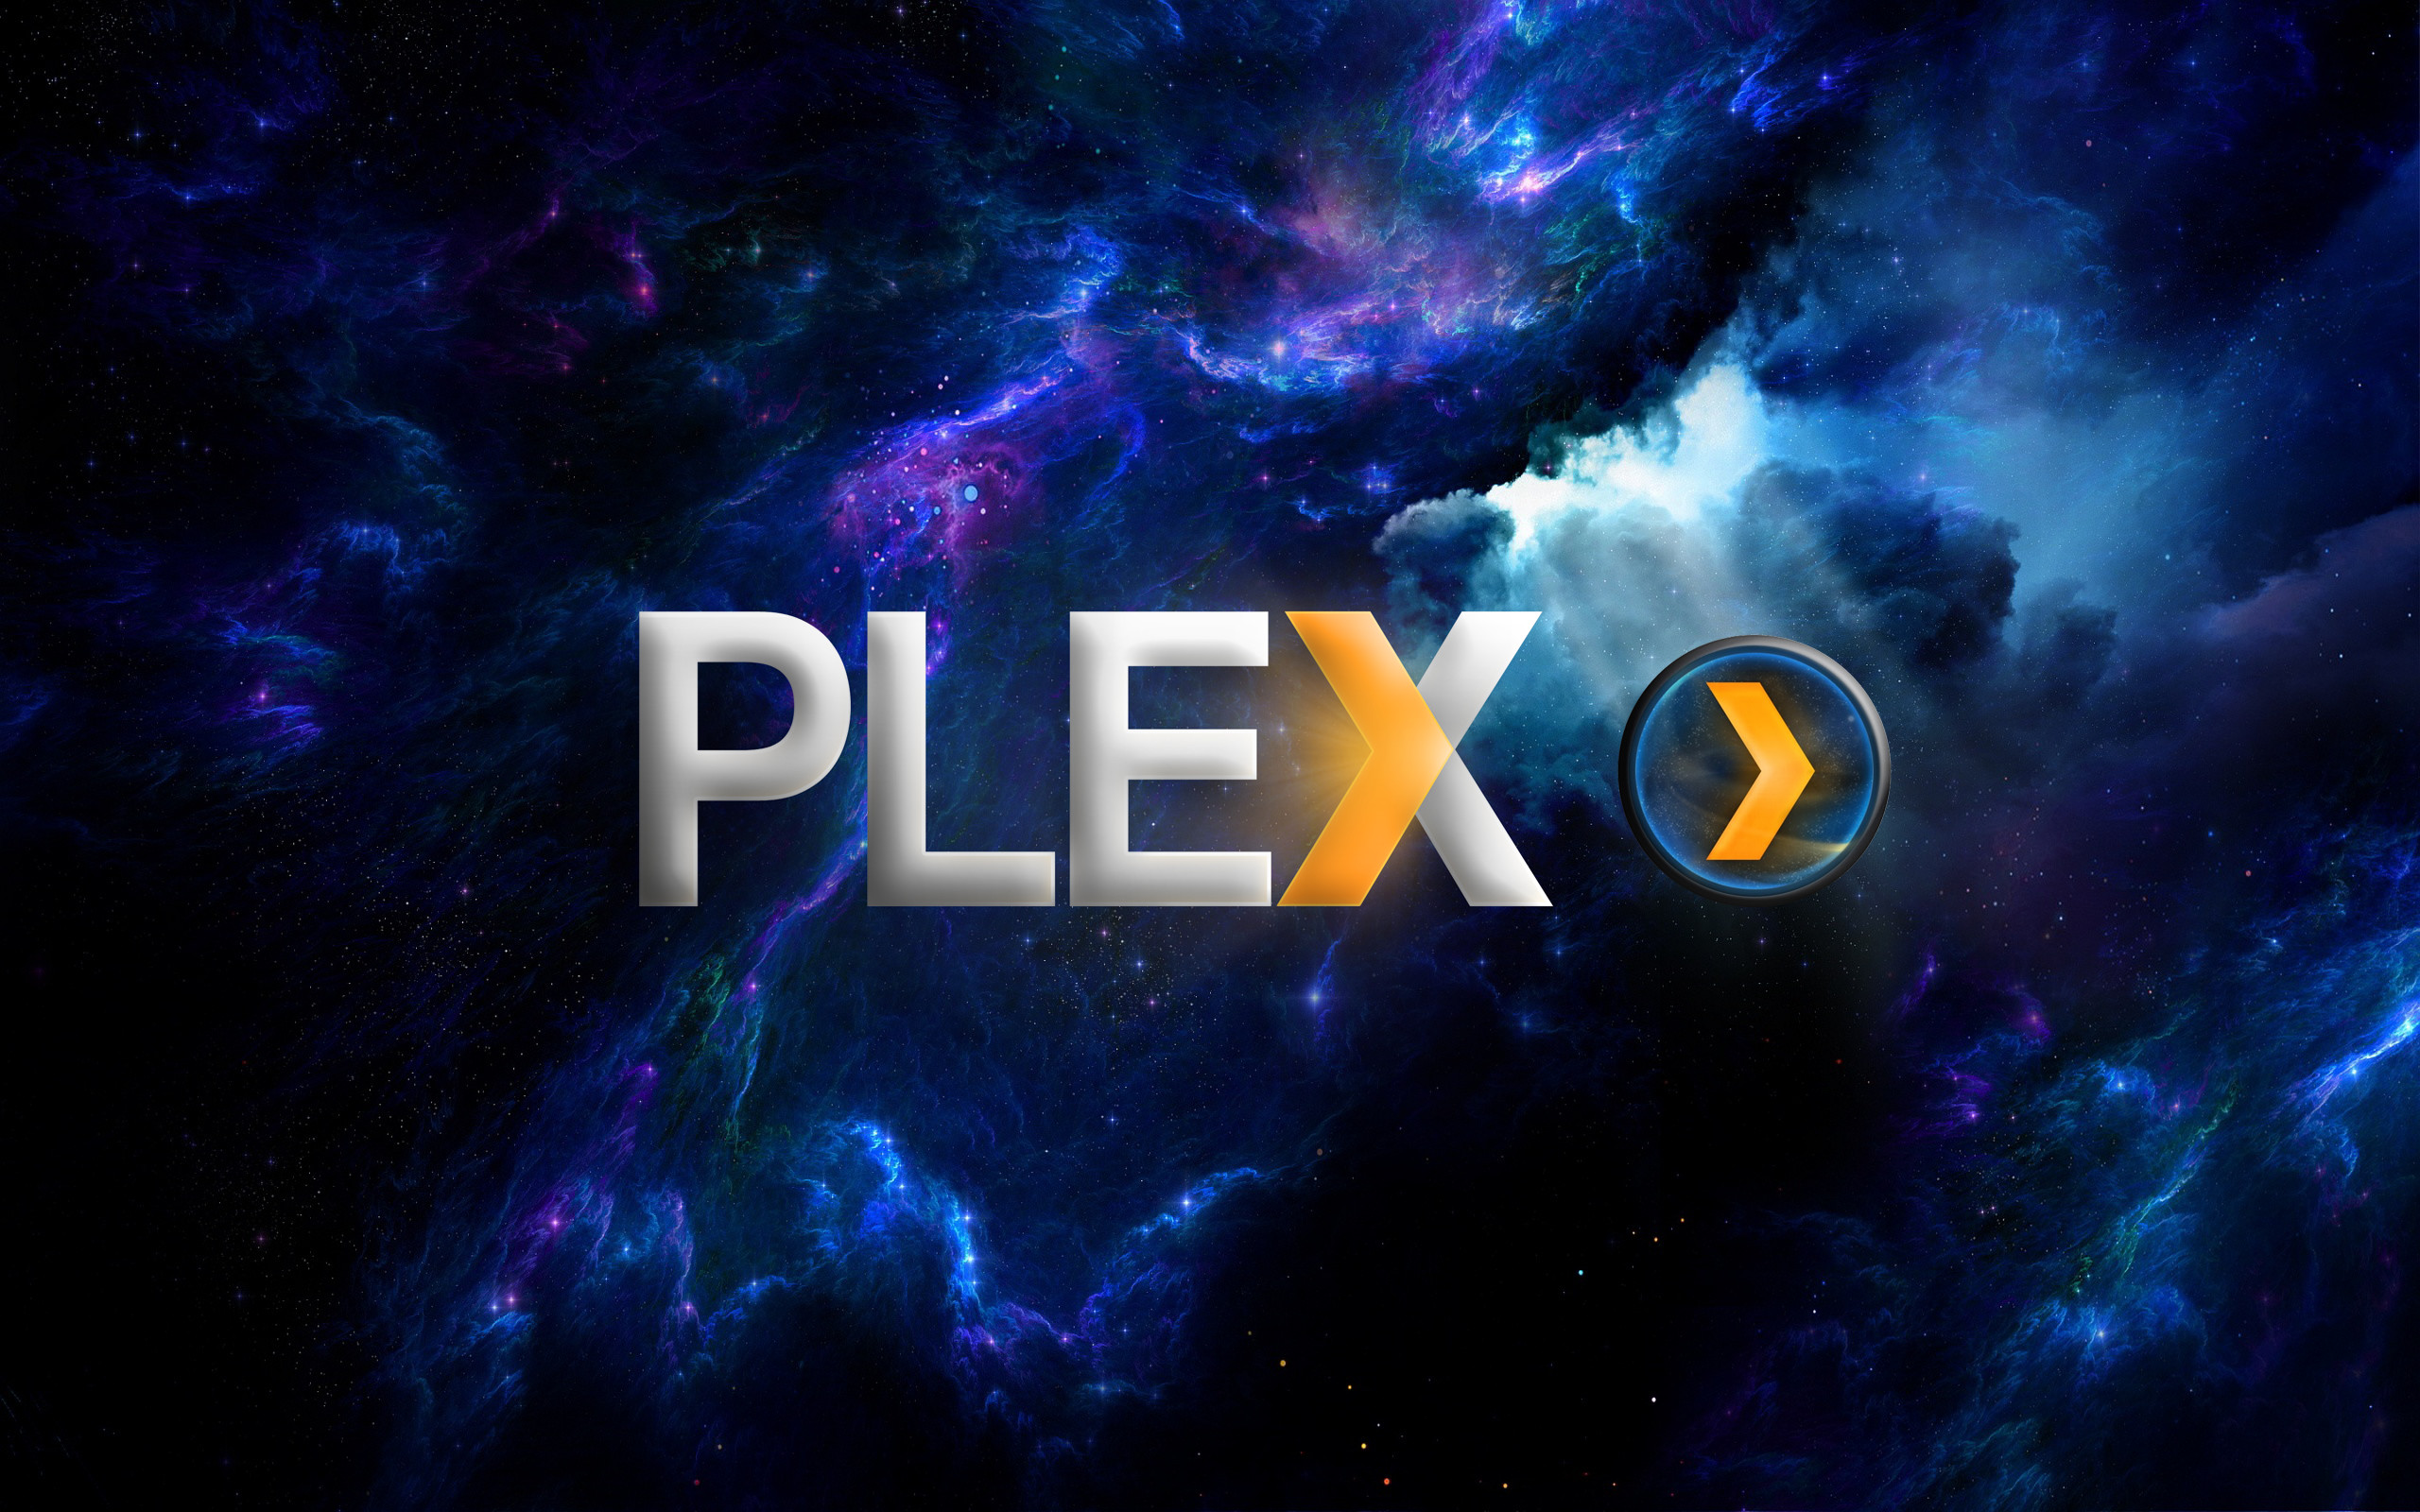 2560x1600 TipsMade a Plex wallpaper, thought I would share -  ...